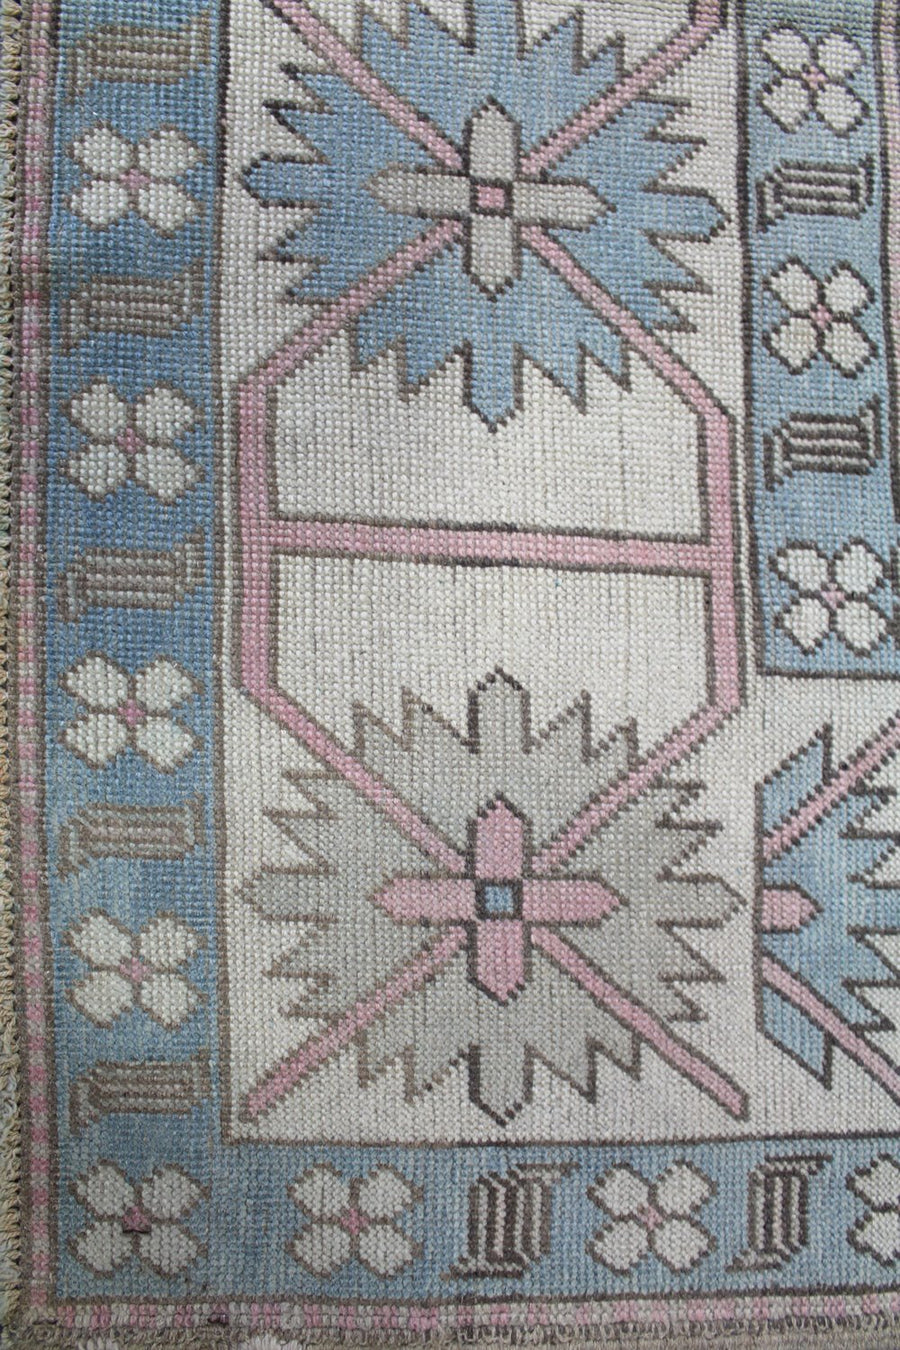 SULTANABAD HANDKNOTTED RUG, J58751